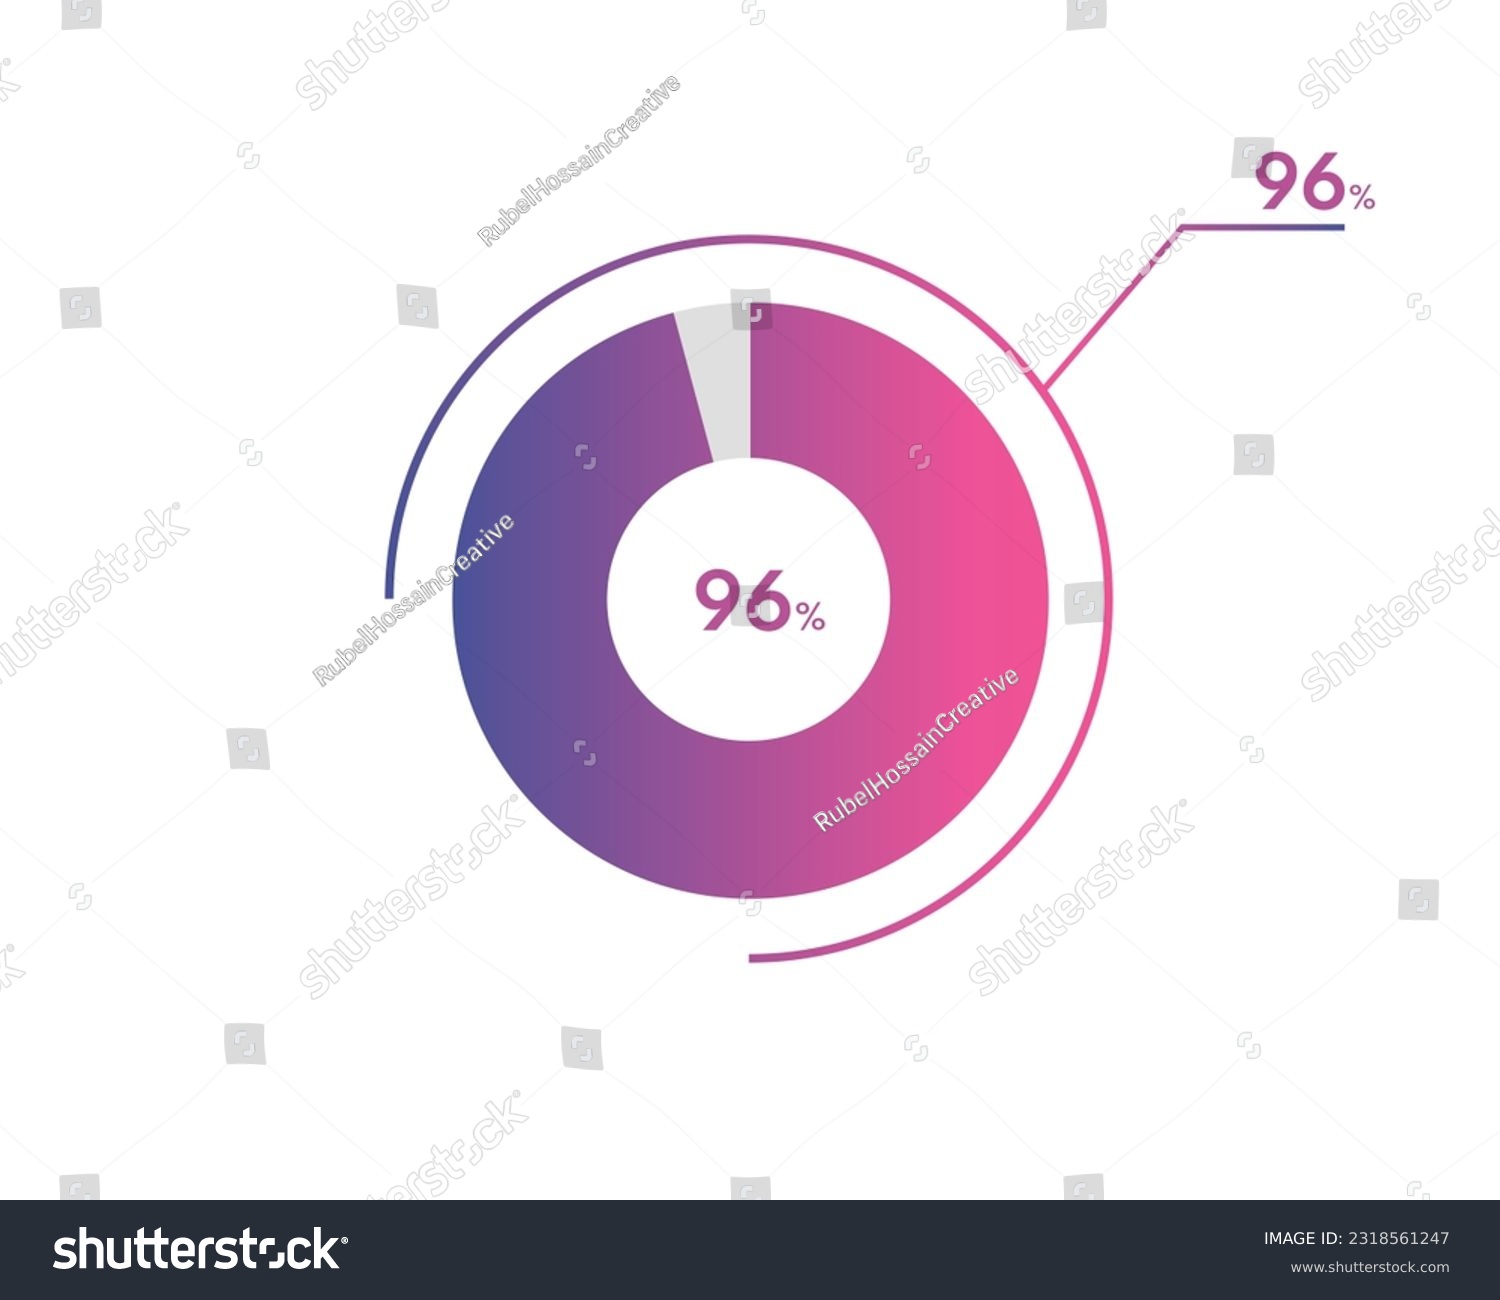 SVG of 96 Percentage circle diagrams Infographics vector, circle diagram business illustration, Designing the 96% Segment in the Pie Chart. svg